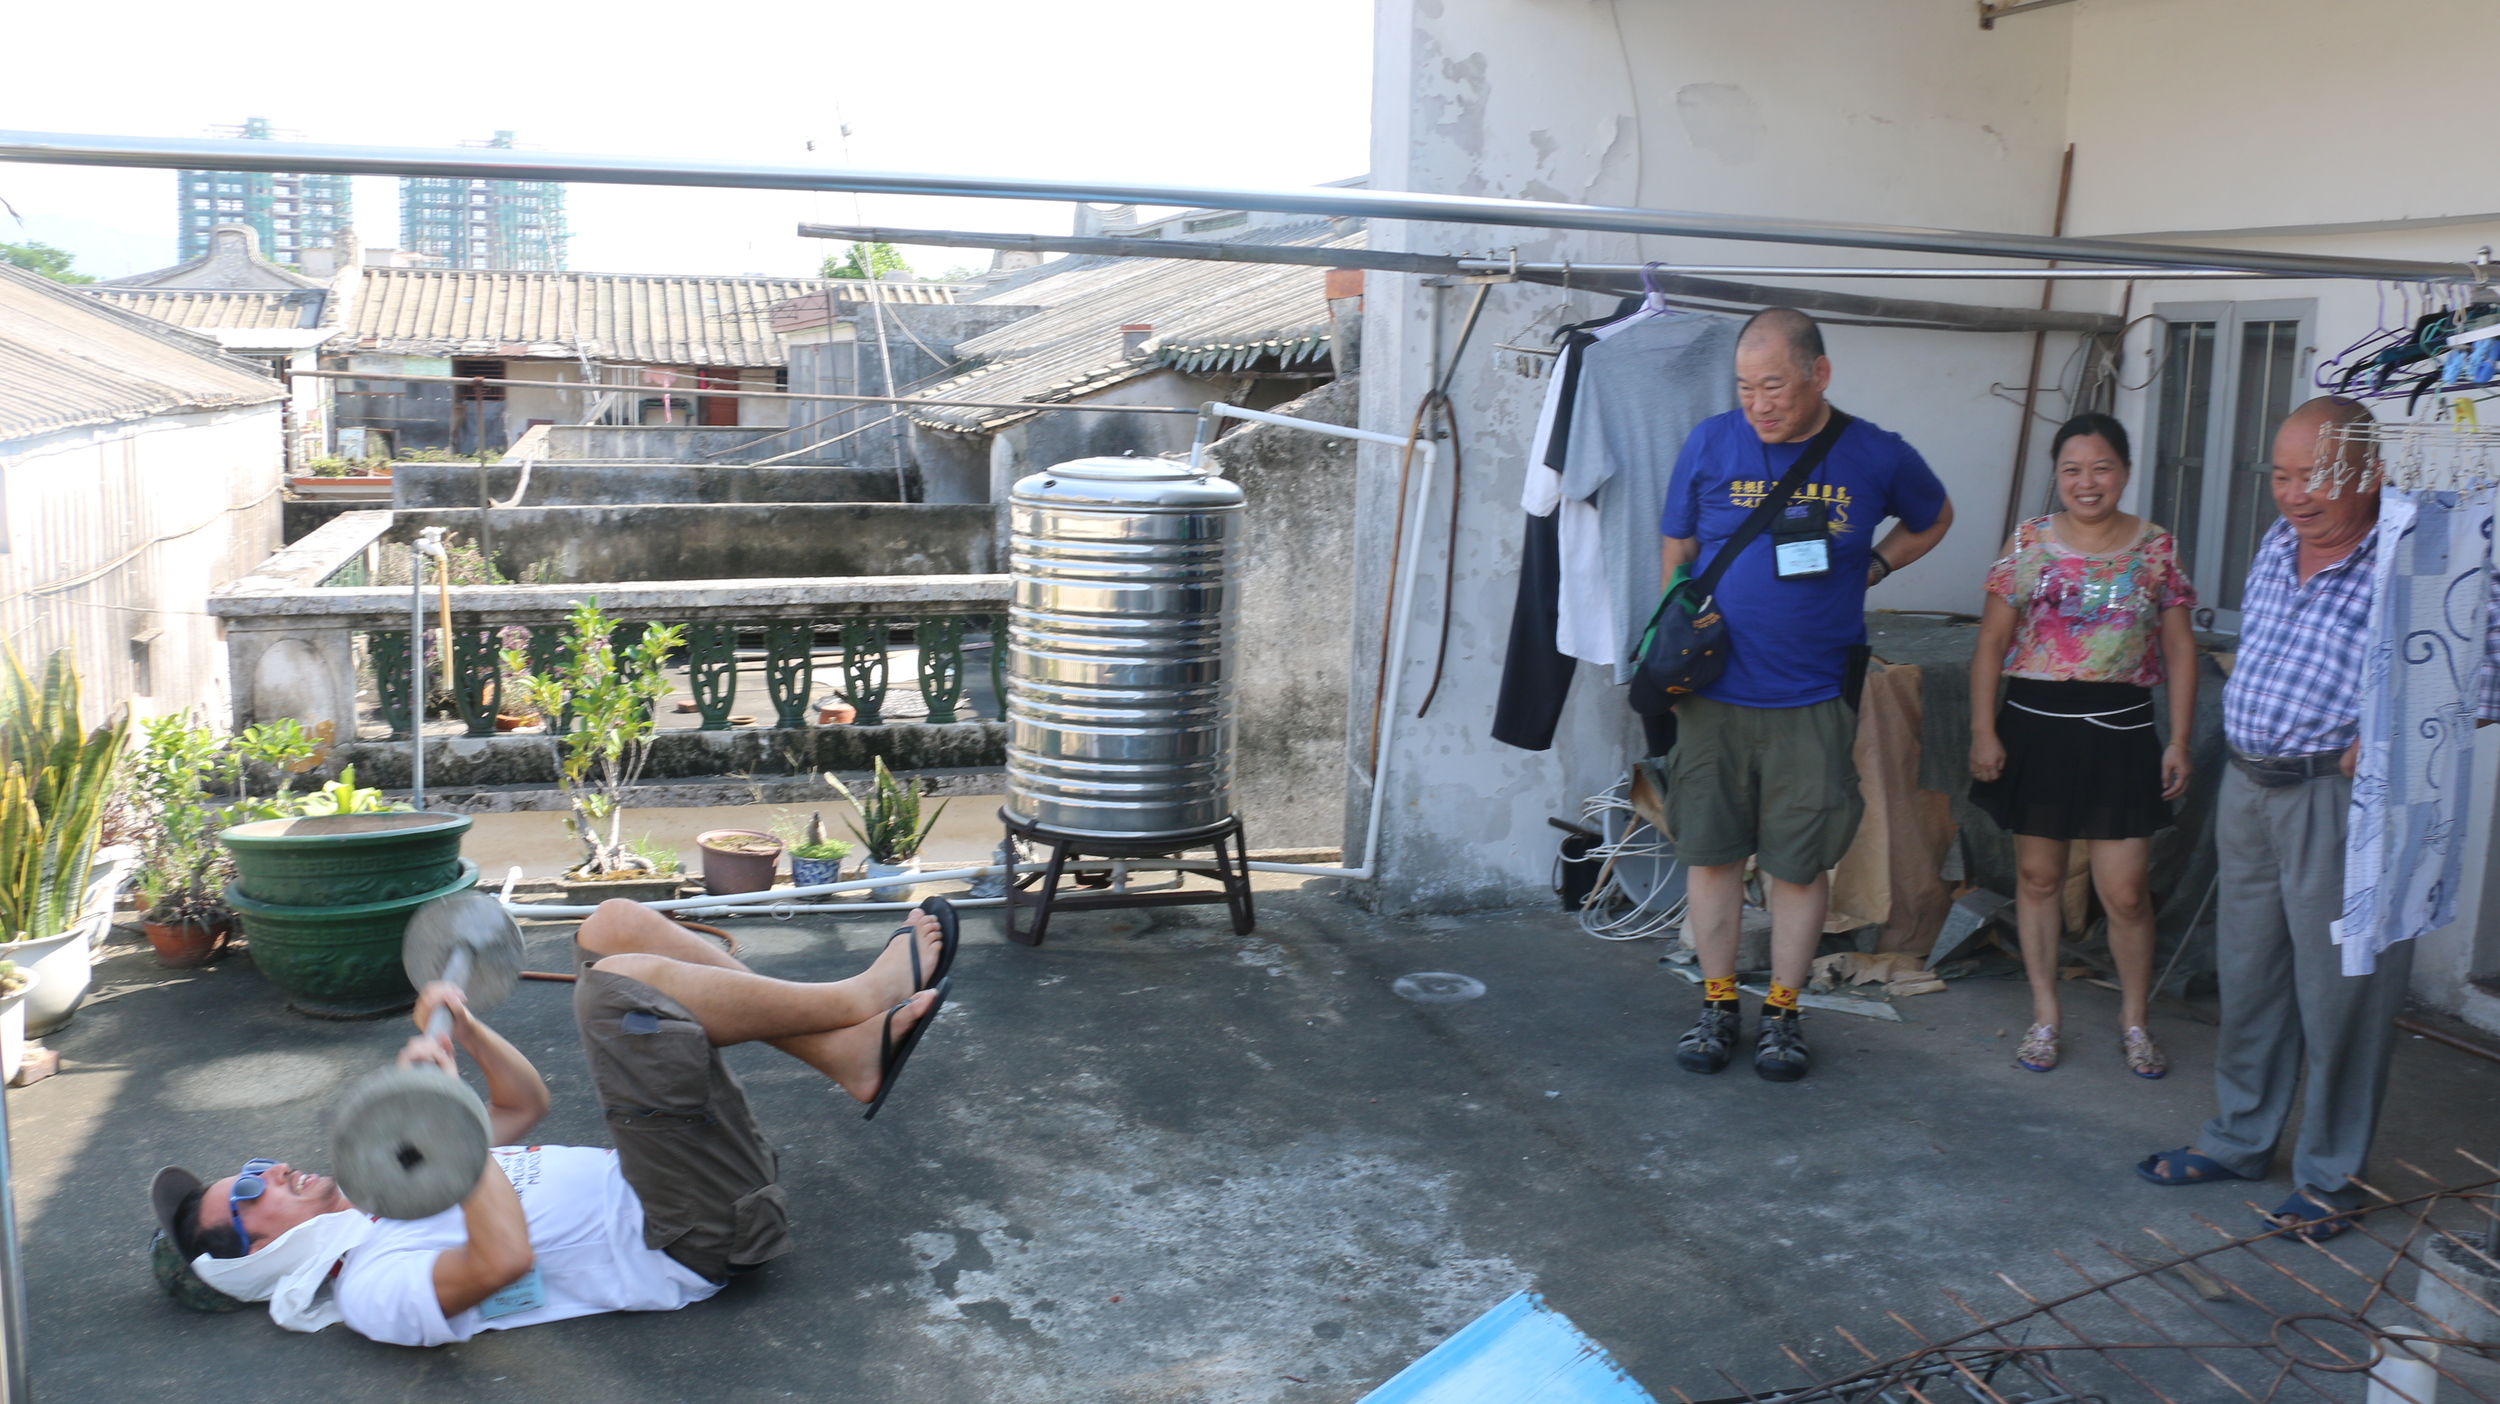 Gino demonstrates his strength on the roof of my third granduncle's home with Steve looking on.